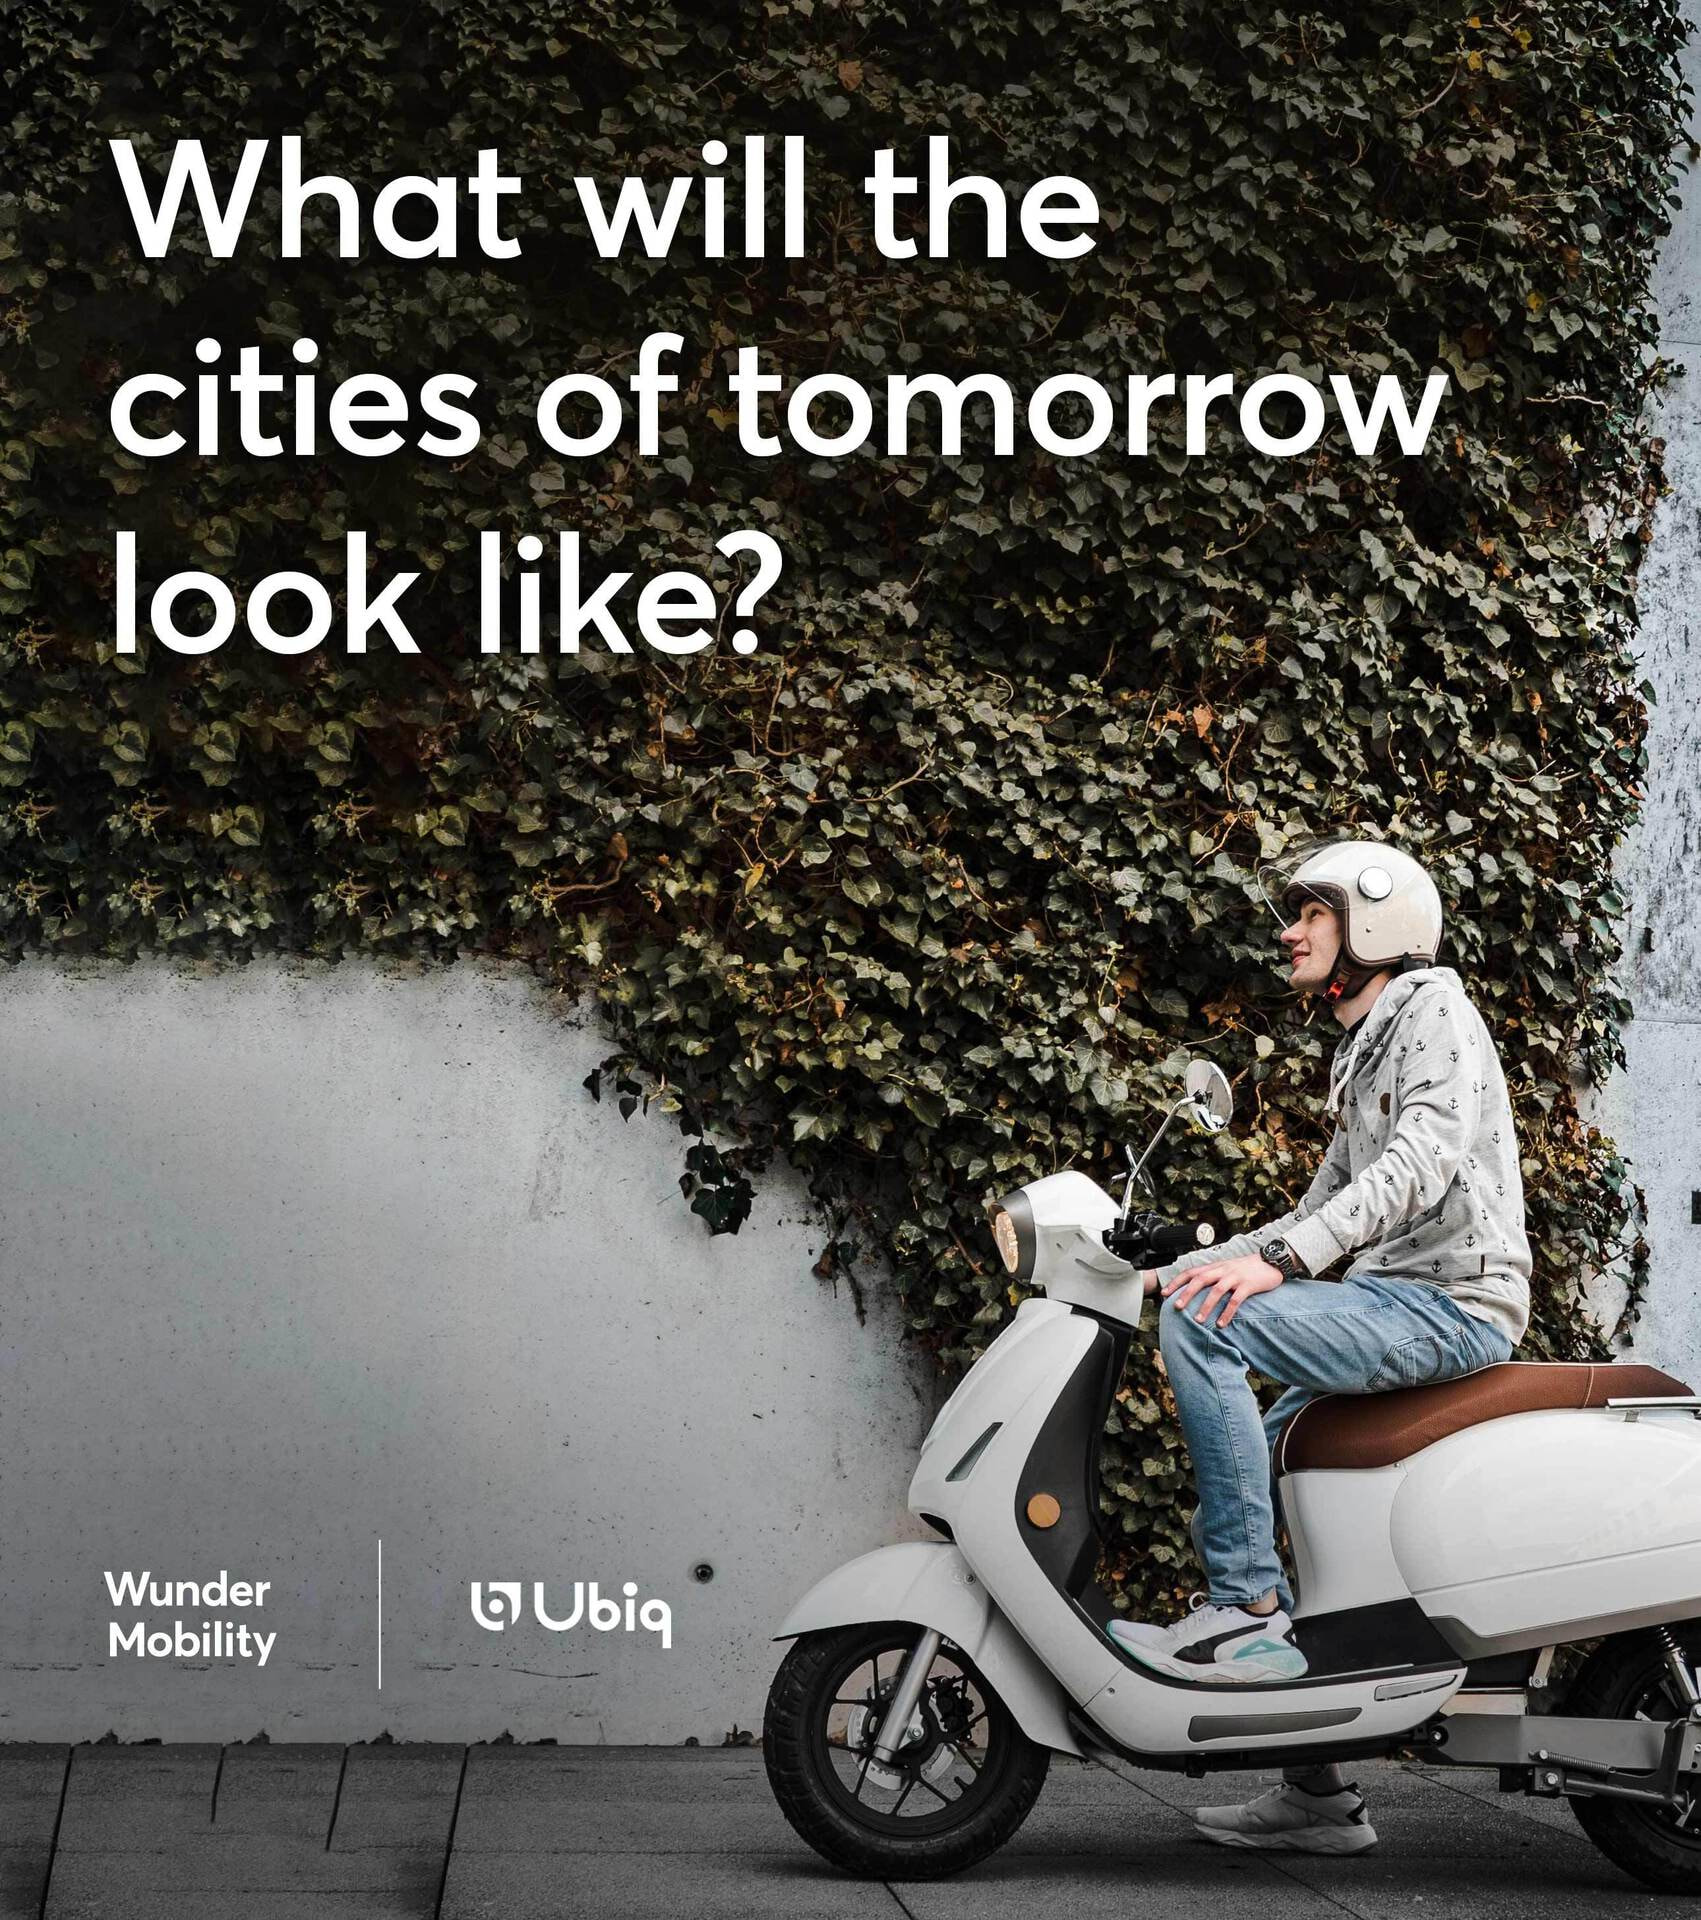 Template titled "What will the cities of tomorrow look like?" featuring an image of a caucasian male riding an e-moped next to a leafy wall.